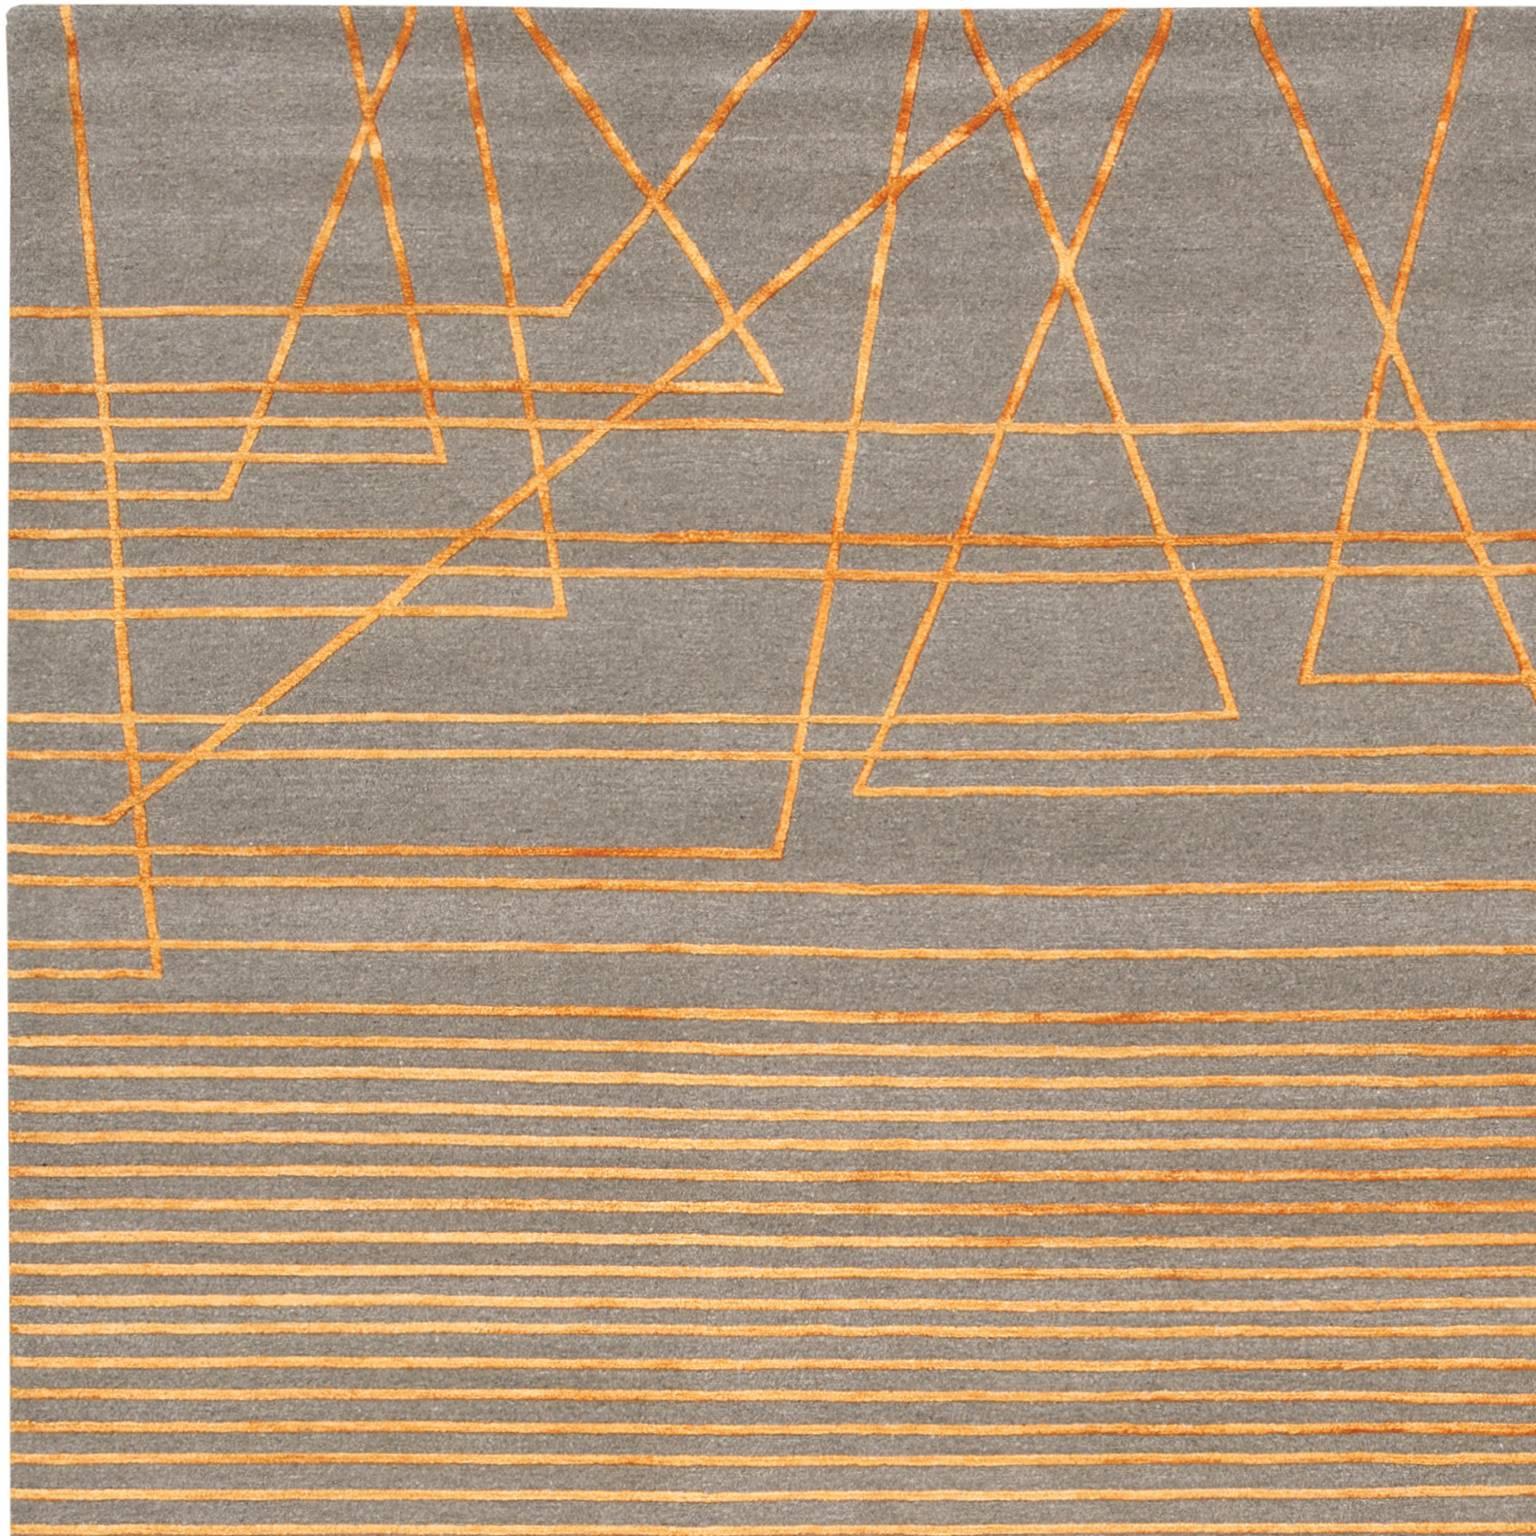 'Broken Lines' comes in three versions No. 01, No. 02 and No. 03. 'Broken Lines No. 02' is produced in four electric colorways with vibrant dyed silk combined with a natural undyed wool grey background providing a soft canvas for these vibrant rugs.